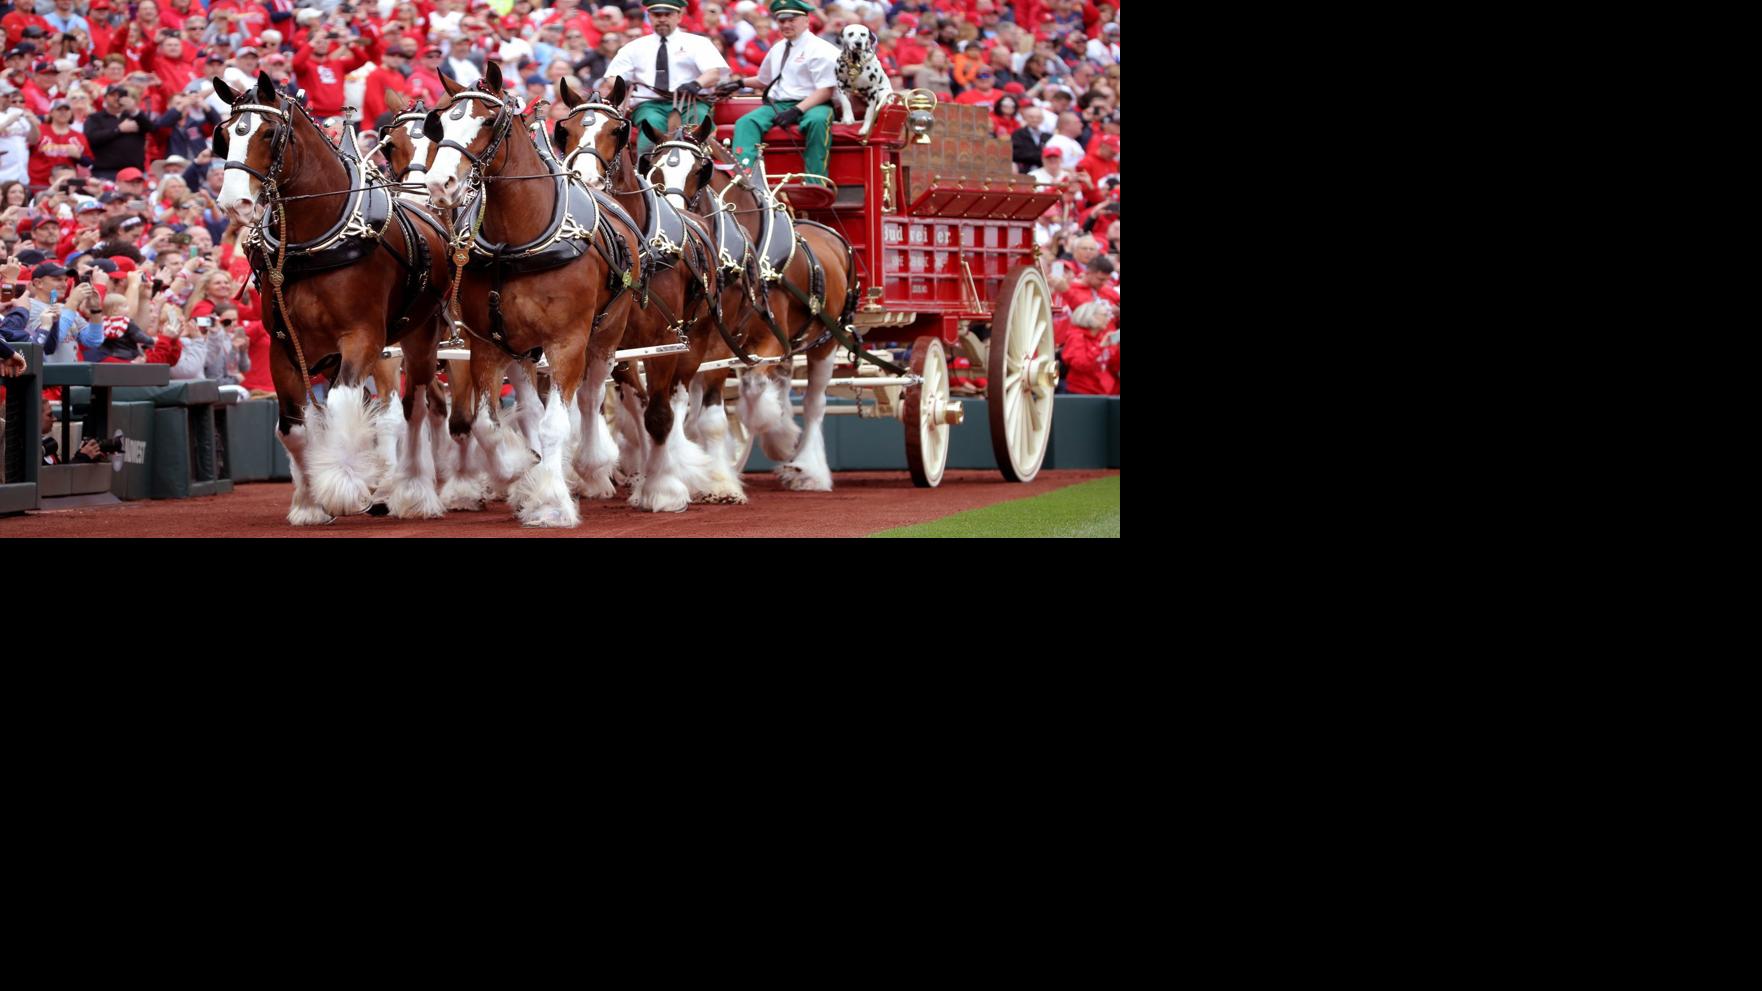 Scenes from 2019 Cardinals opening day | St. Louis Cardinals | www.strongerinc.org